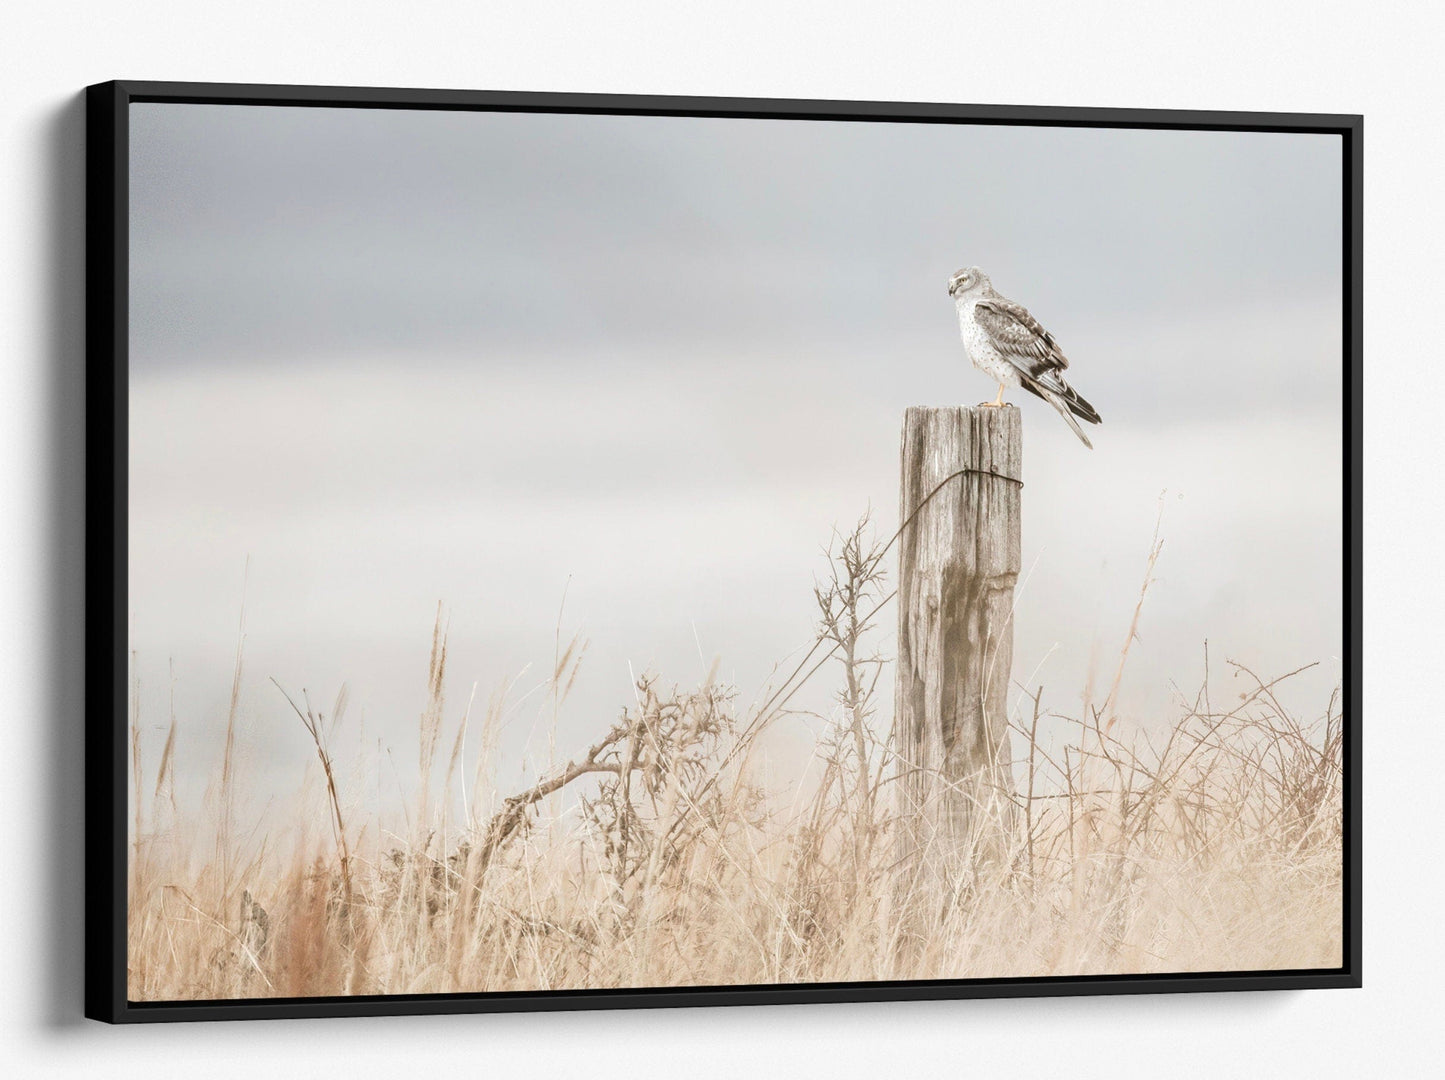 Northern Harrier Hawk on Fence Canvas-Black Frame / 12 x 18 Inches Wall Art Teri James Photography